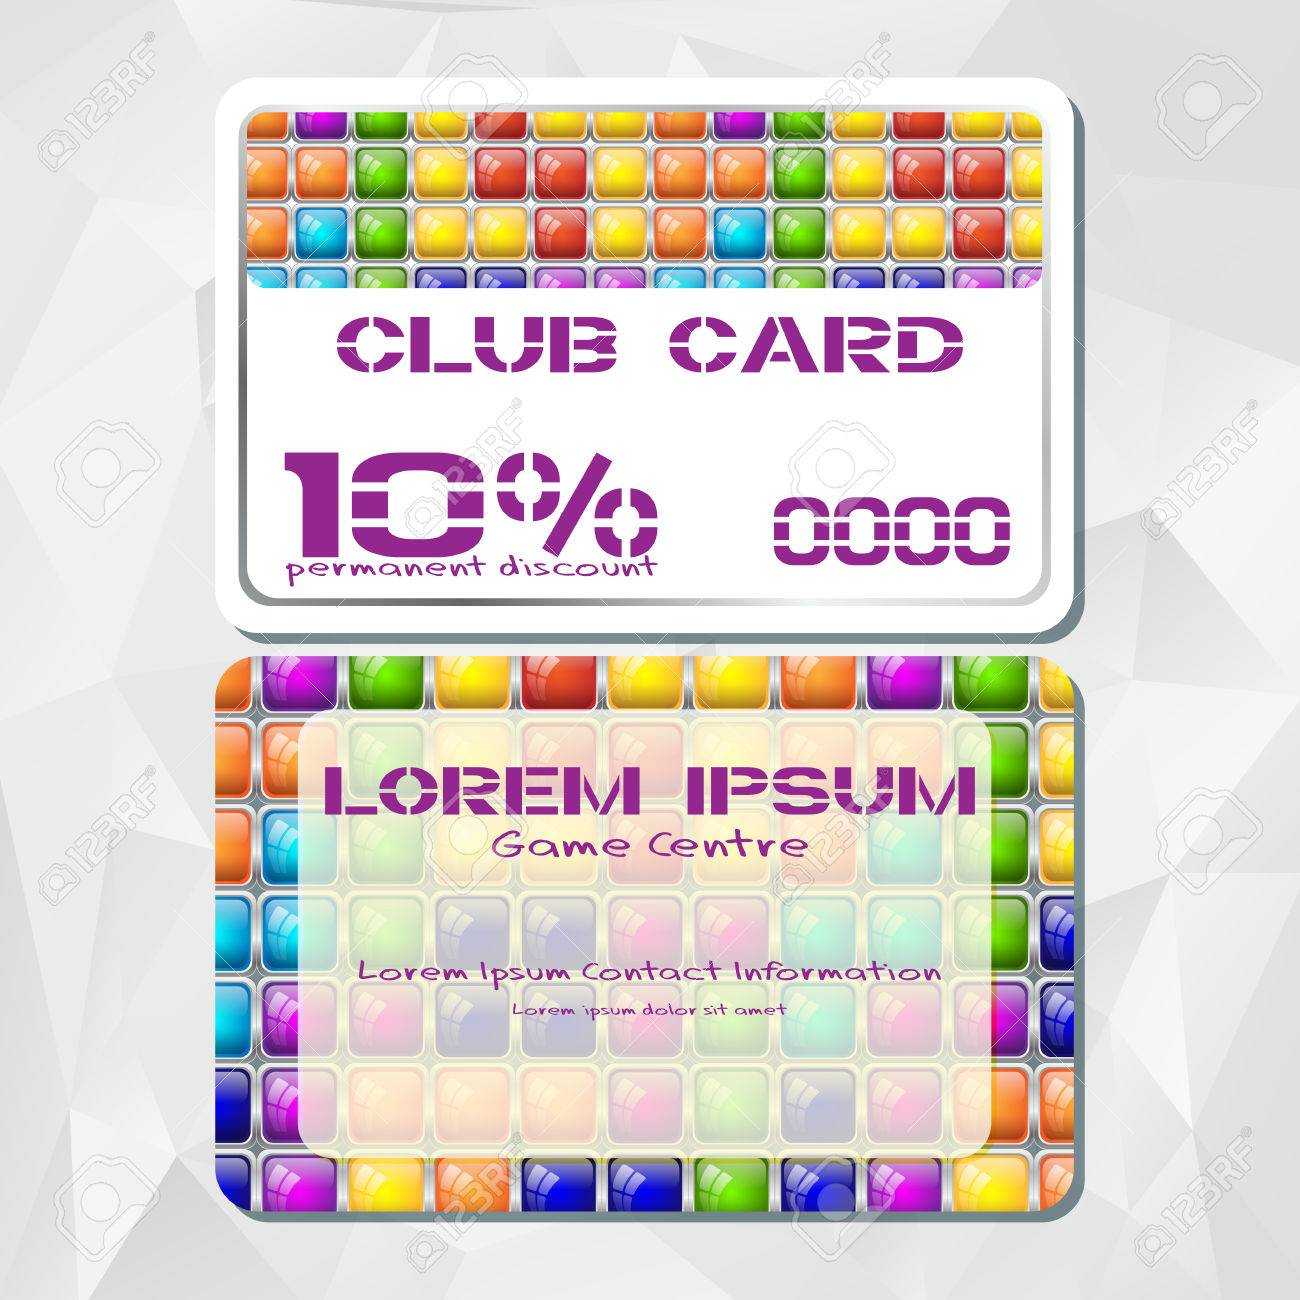 Template Of Discount Card In Tile Style With Colorful Mosaic.. Intended For Clue Card Template